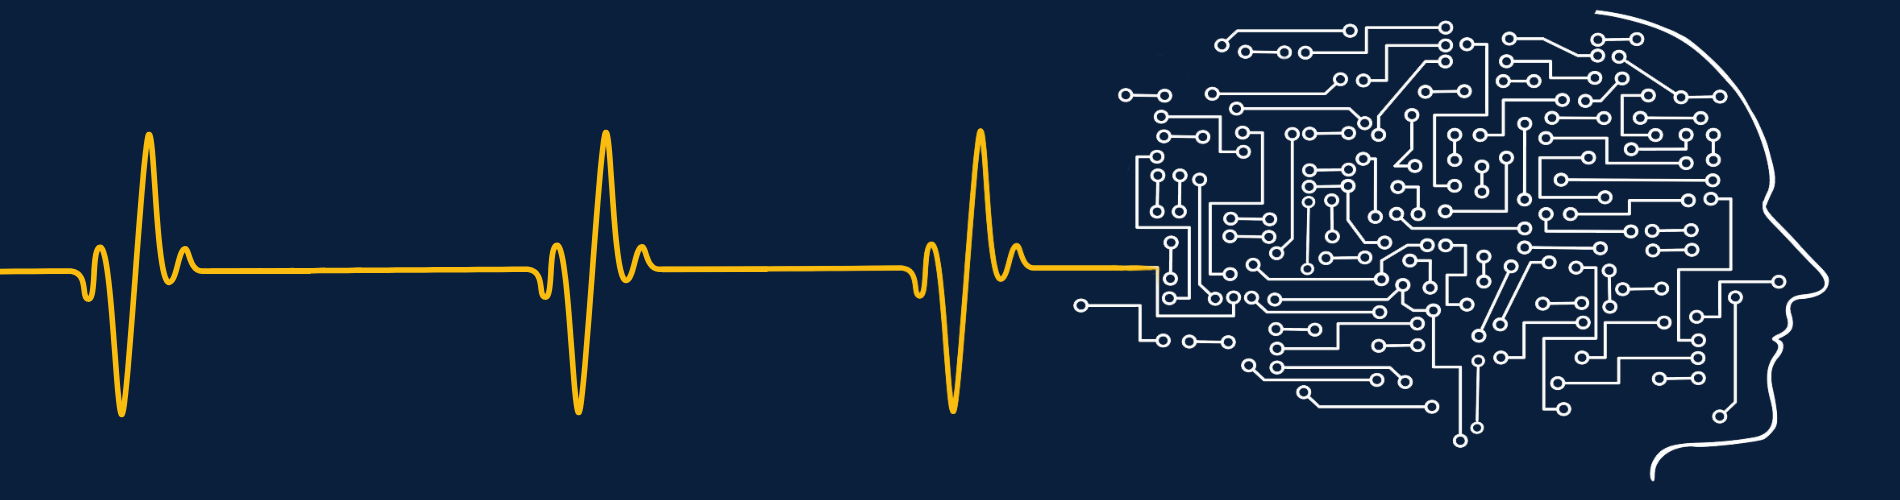 head with circuits and heart monitor